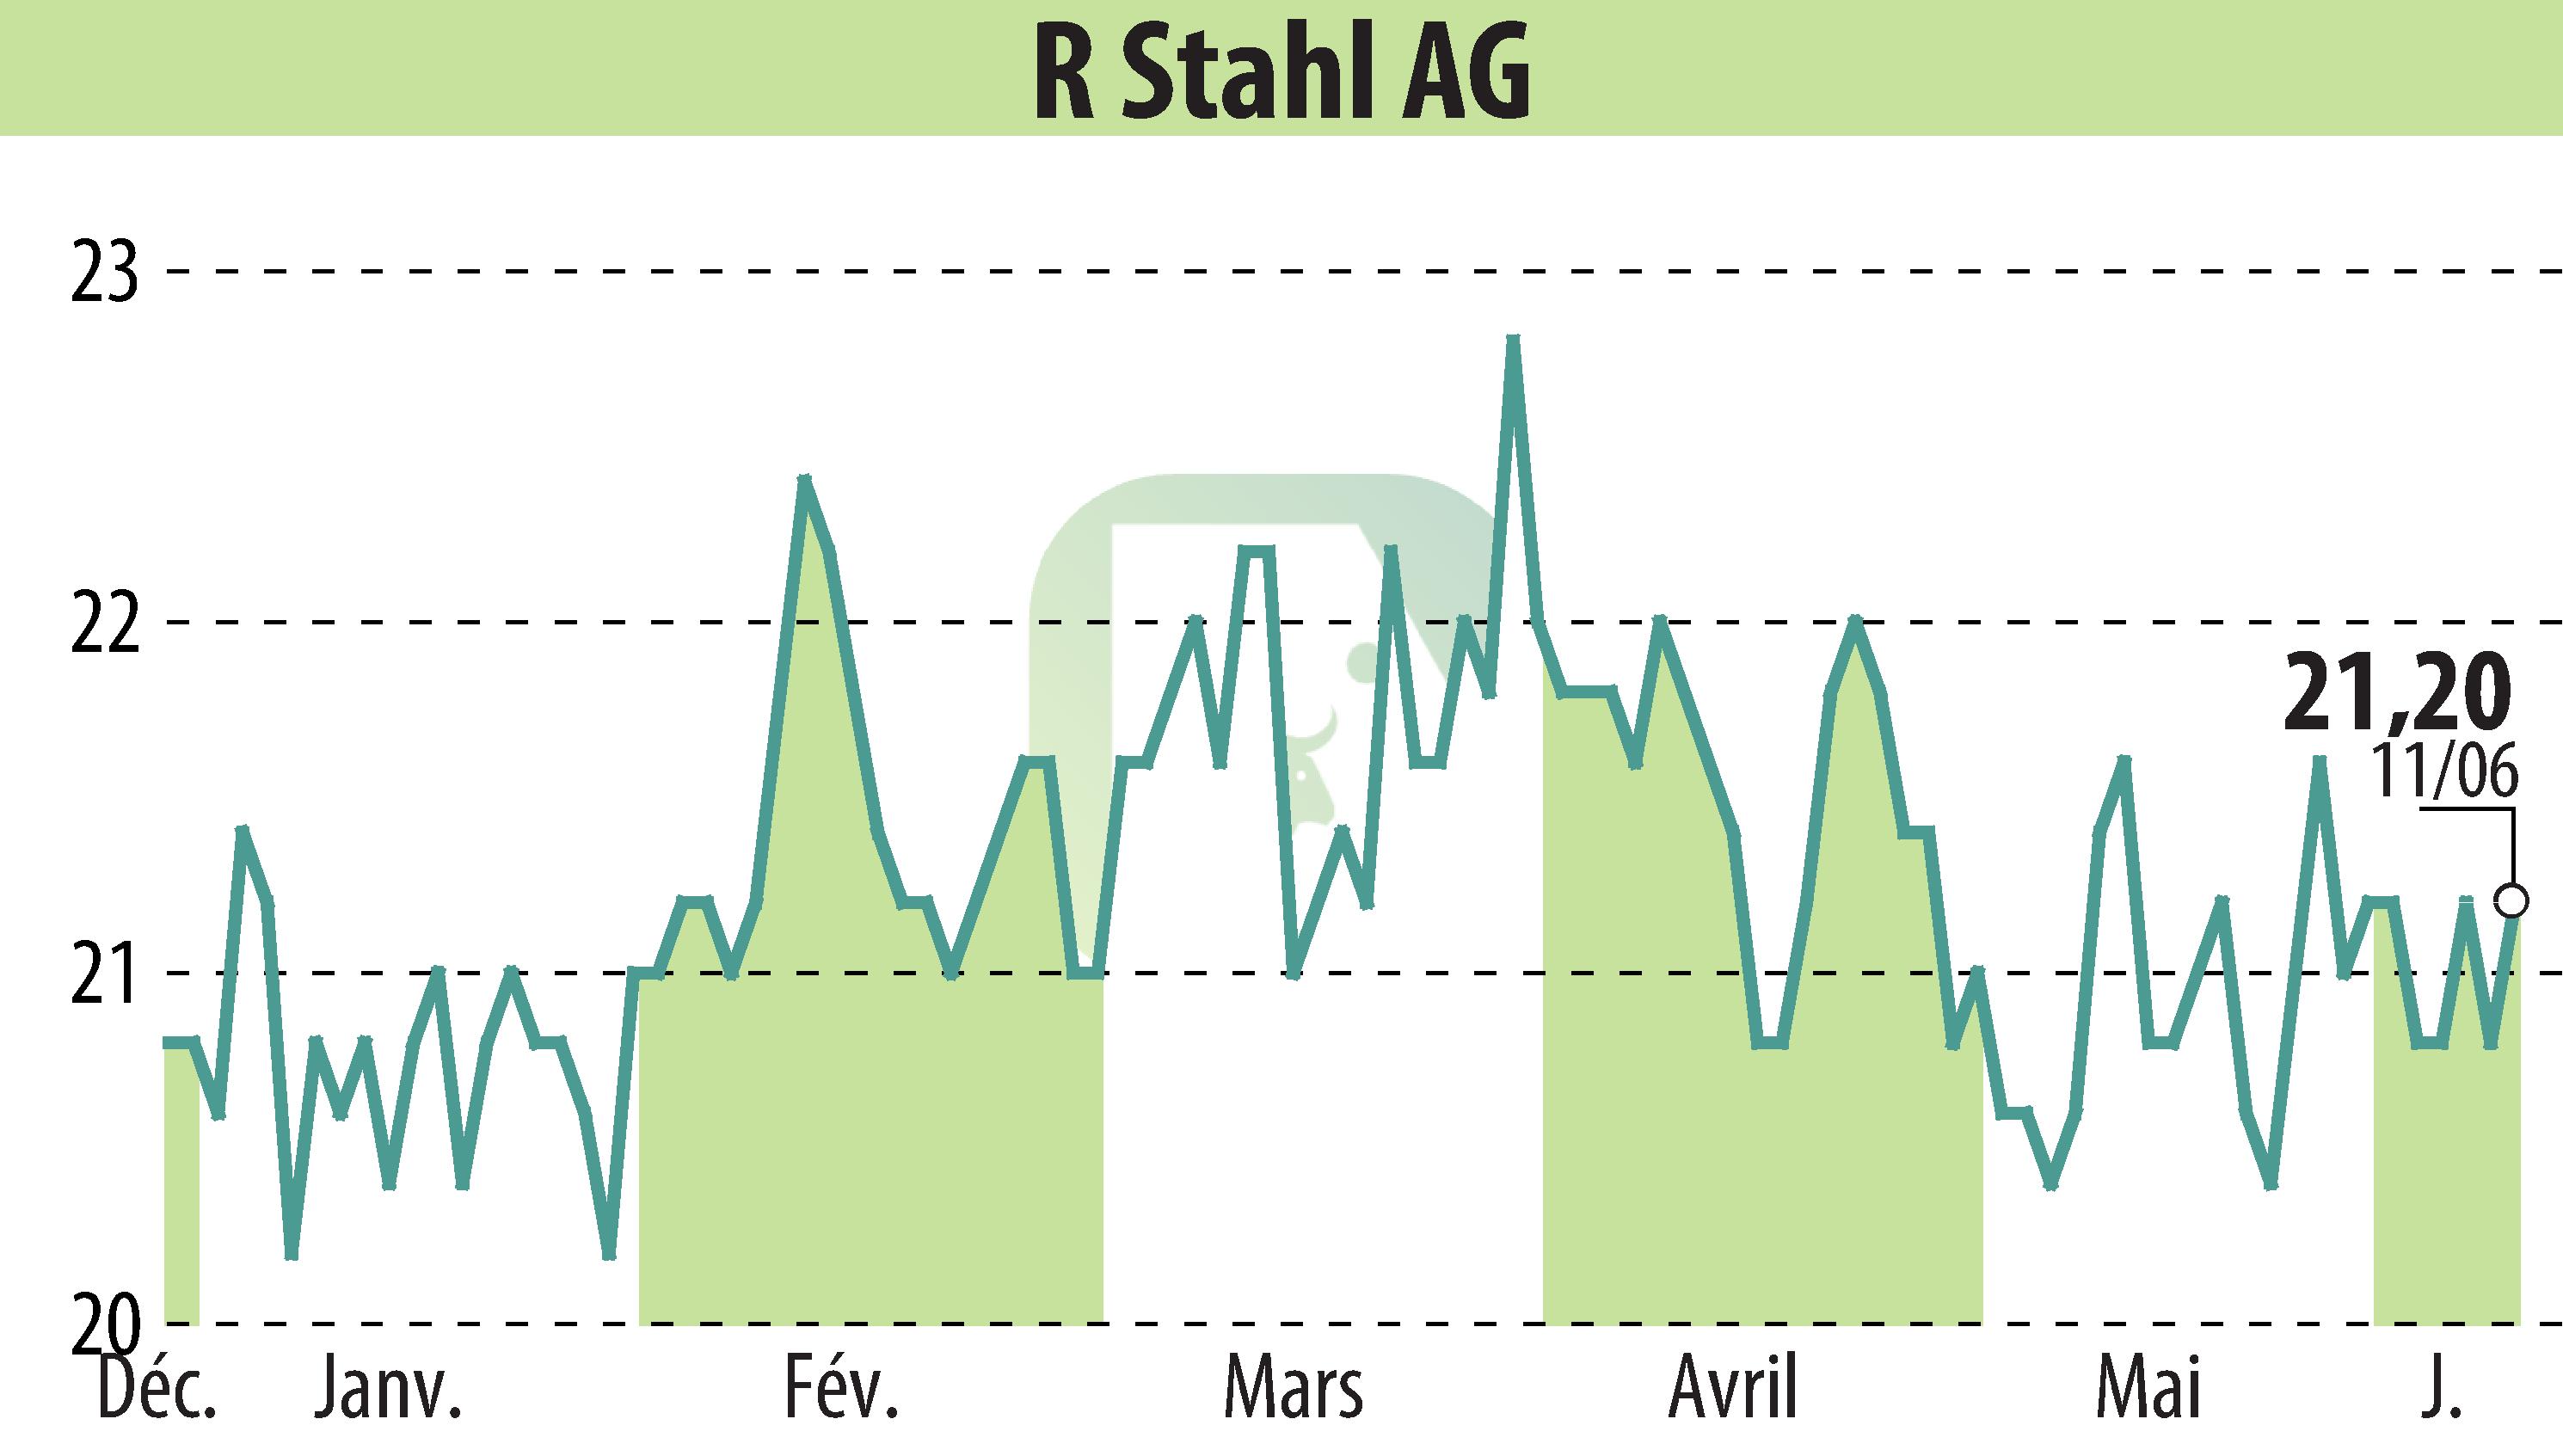 Stock price chart of R. Stahl AG (EBR:RSL2) showing fluctuations.